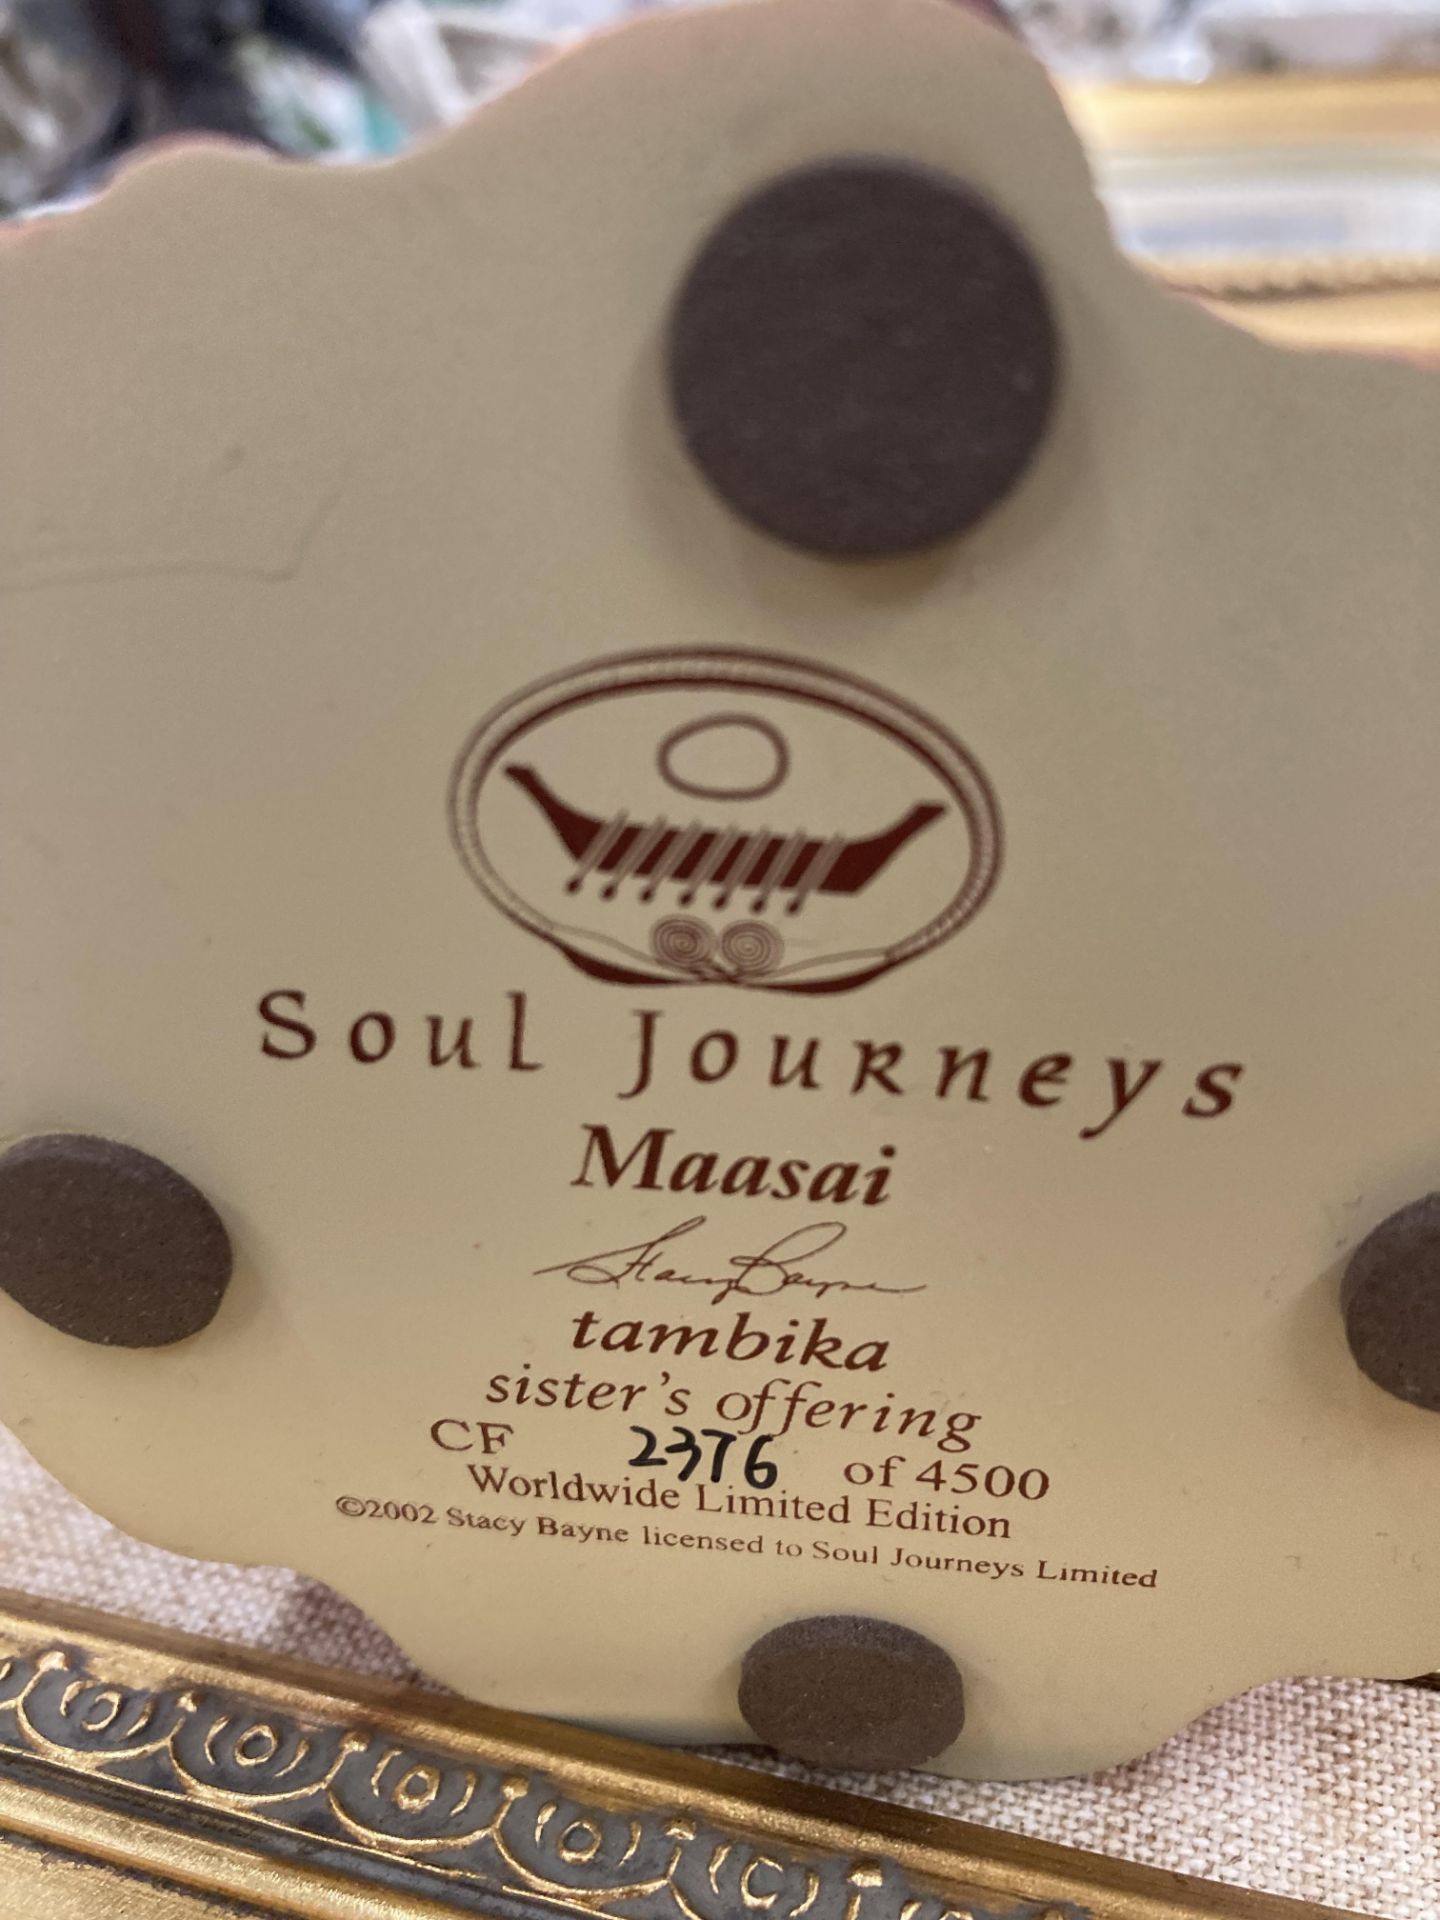 THREE 'SOUL JOURNEYS' MAASSAI FIGURES ALL LIMITED EDITIONS PLUS ONE OTHER - Image 13 of 14